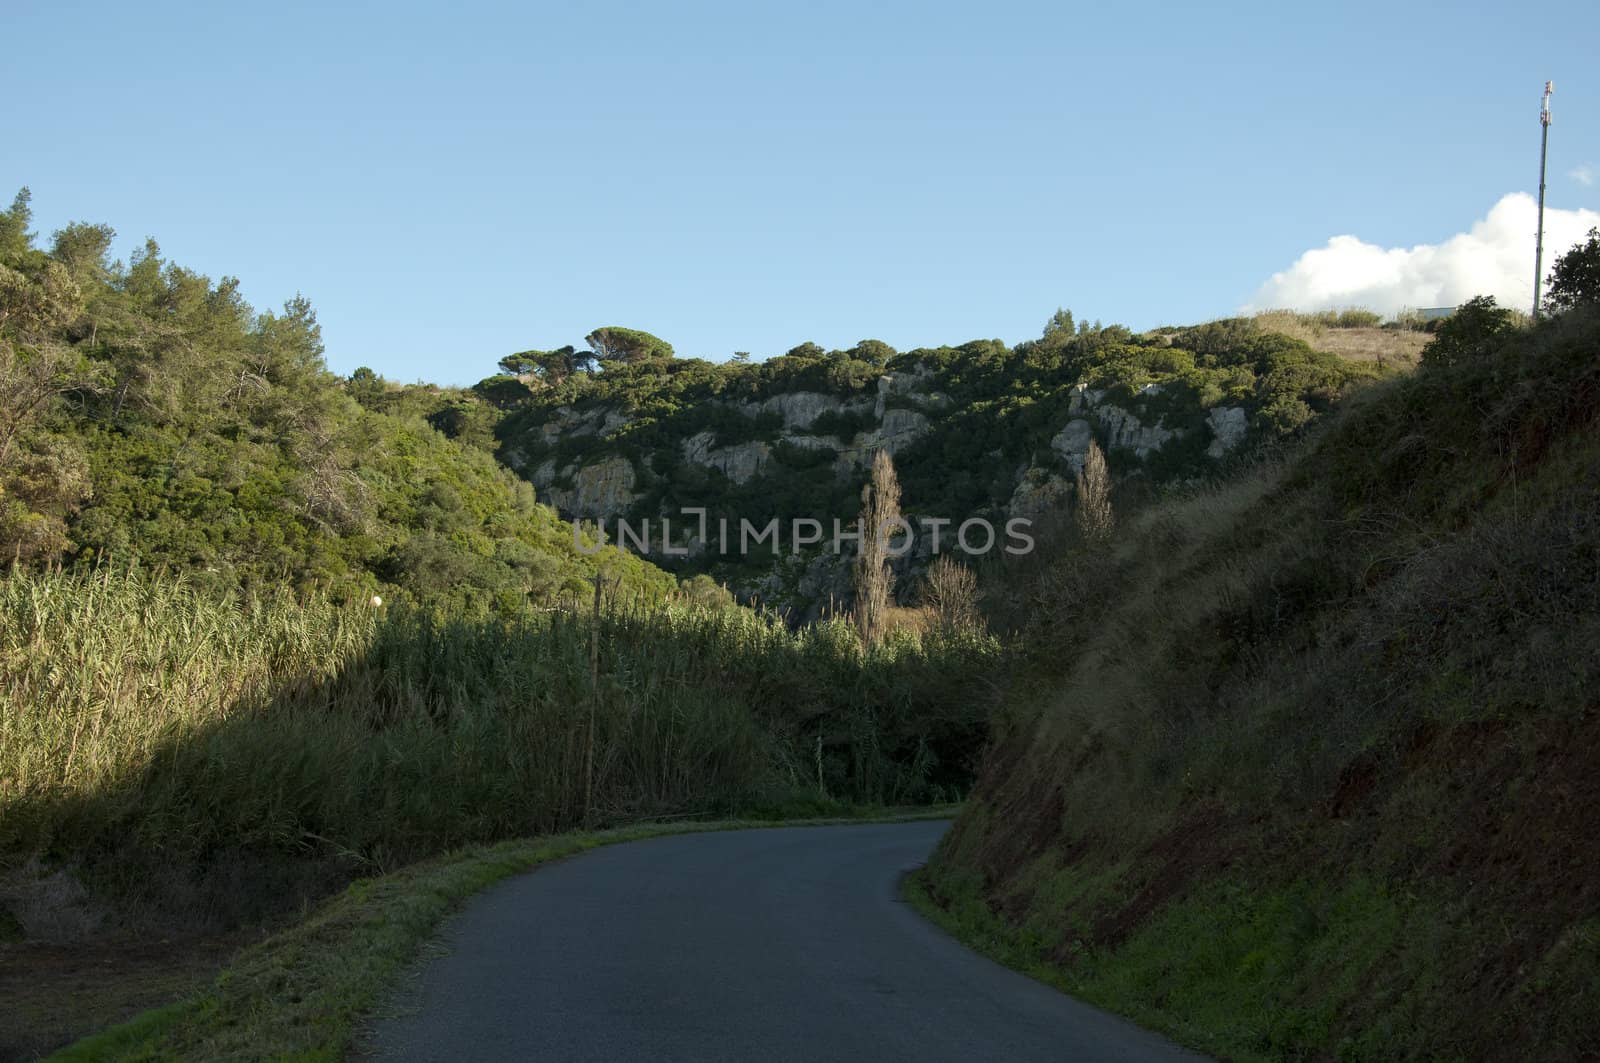 Portugal mountain with a beautiful forest overgrown with caves